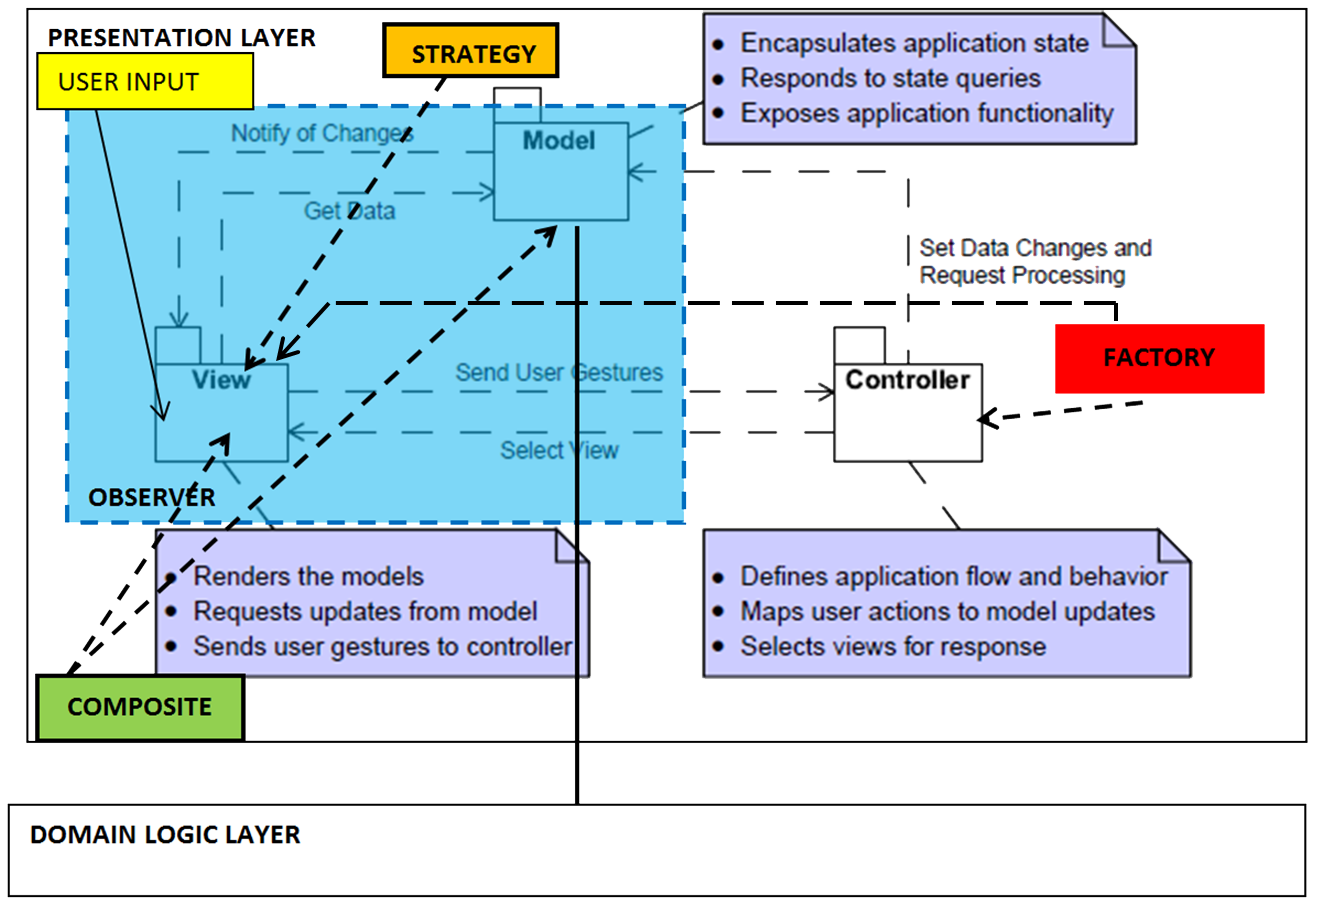 Constructing the Model-View-Controller Pattern using Detailed Design Patterns Diagram